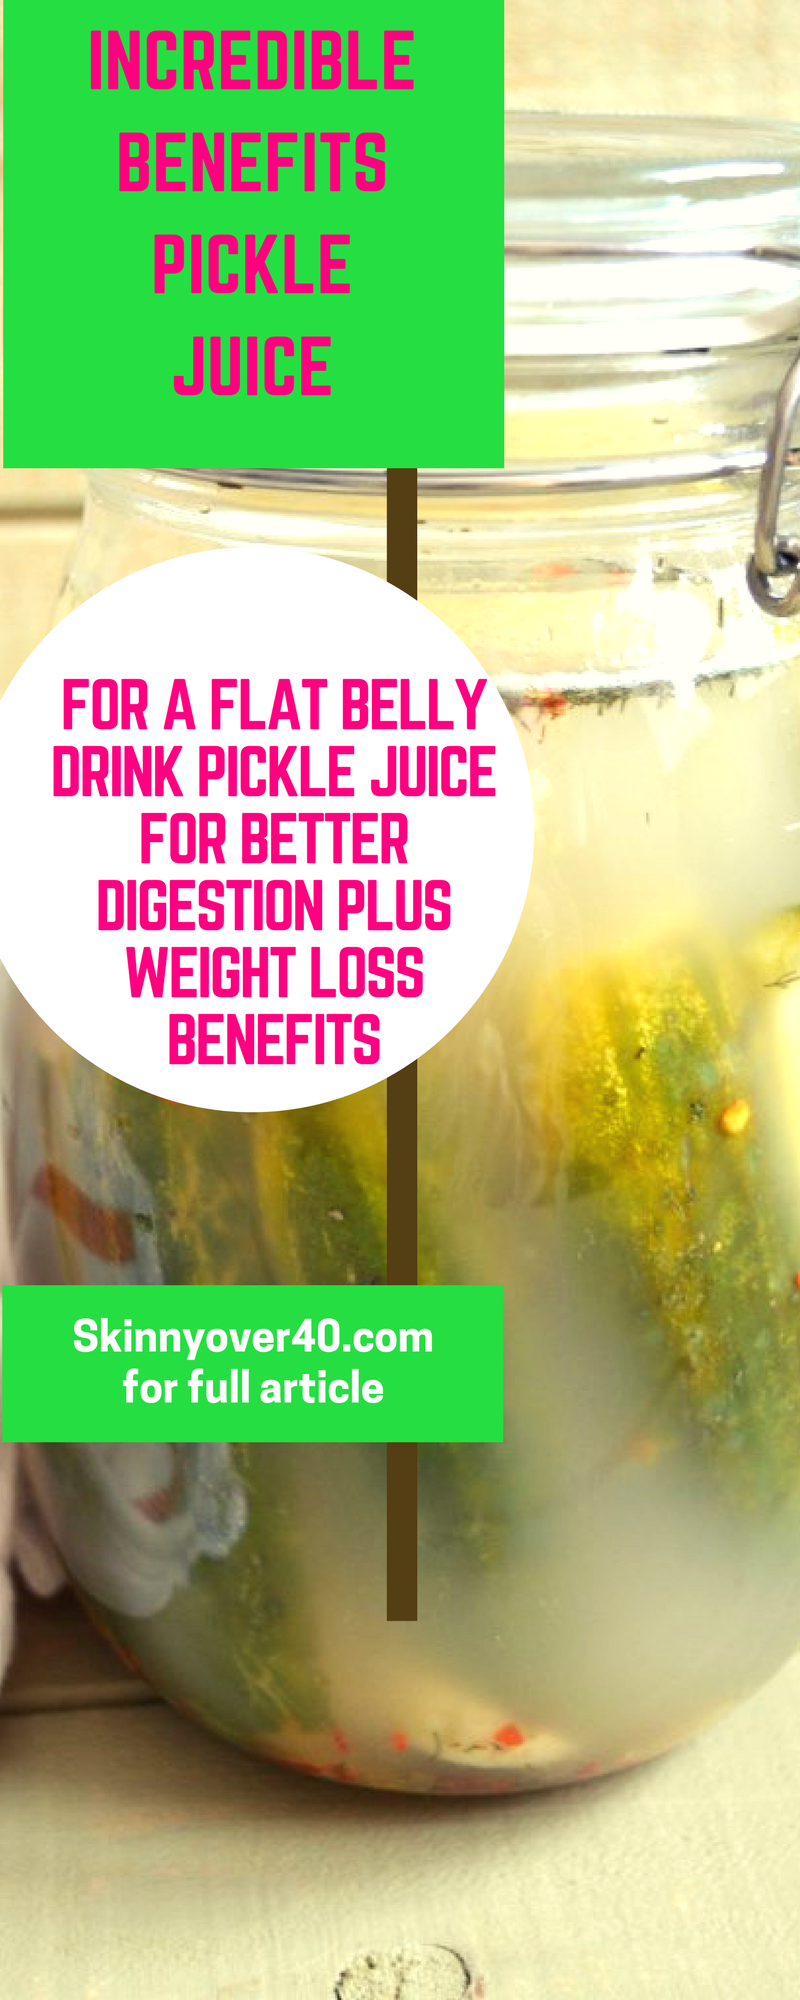 Pickle Juice has amazing benefits for your body which include weight loss, better digestion, lose belly bloat, hydrate after a tough workout and relieve muscle cramps. How to cure a hangover, drink pickle juice.